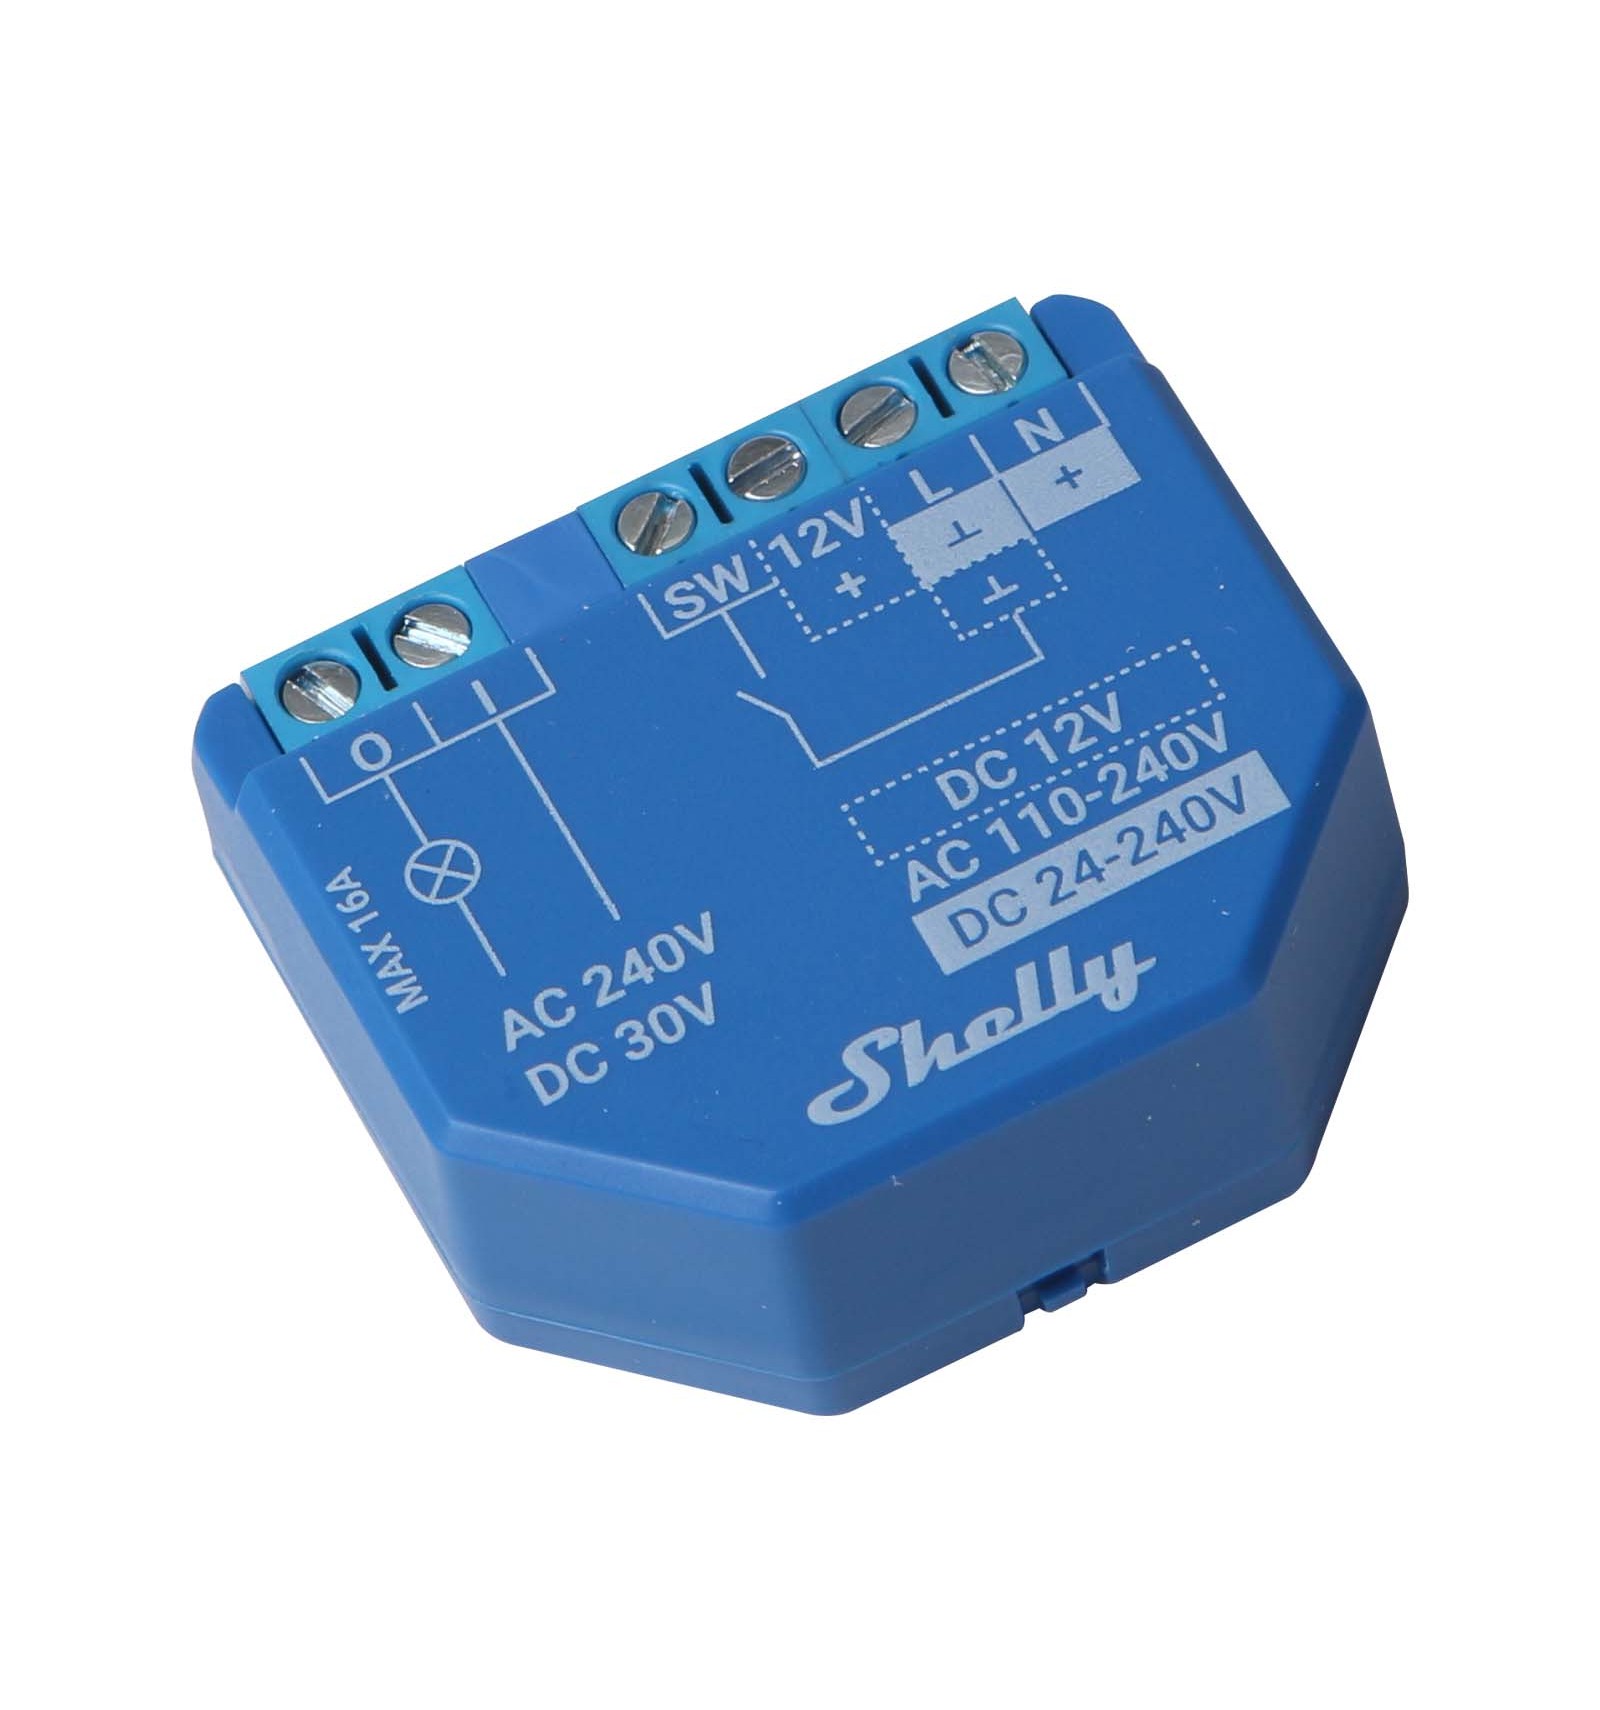 Shelly 1PM WiFi Relay Switch For Electrical (up to 3.5kW) Energy